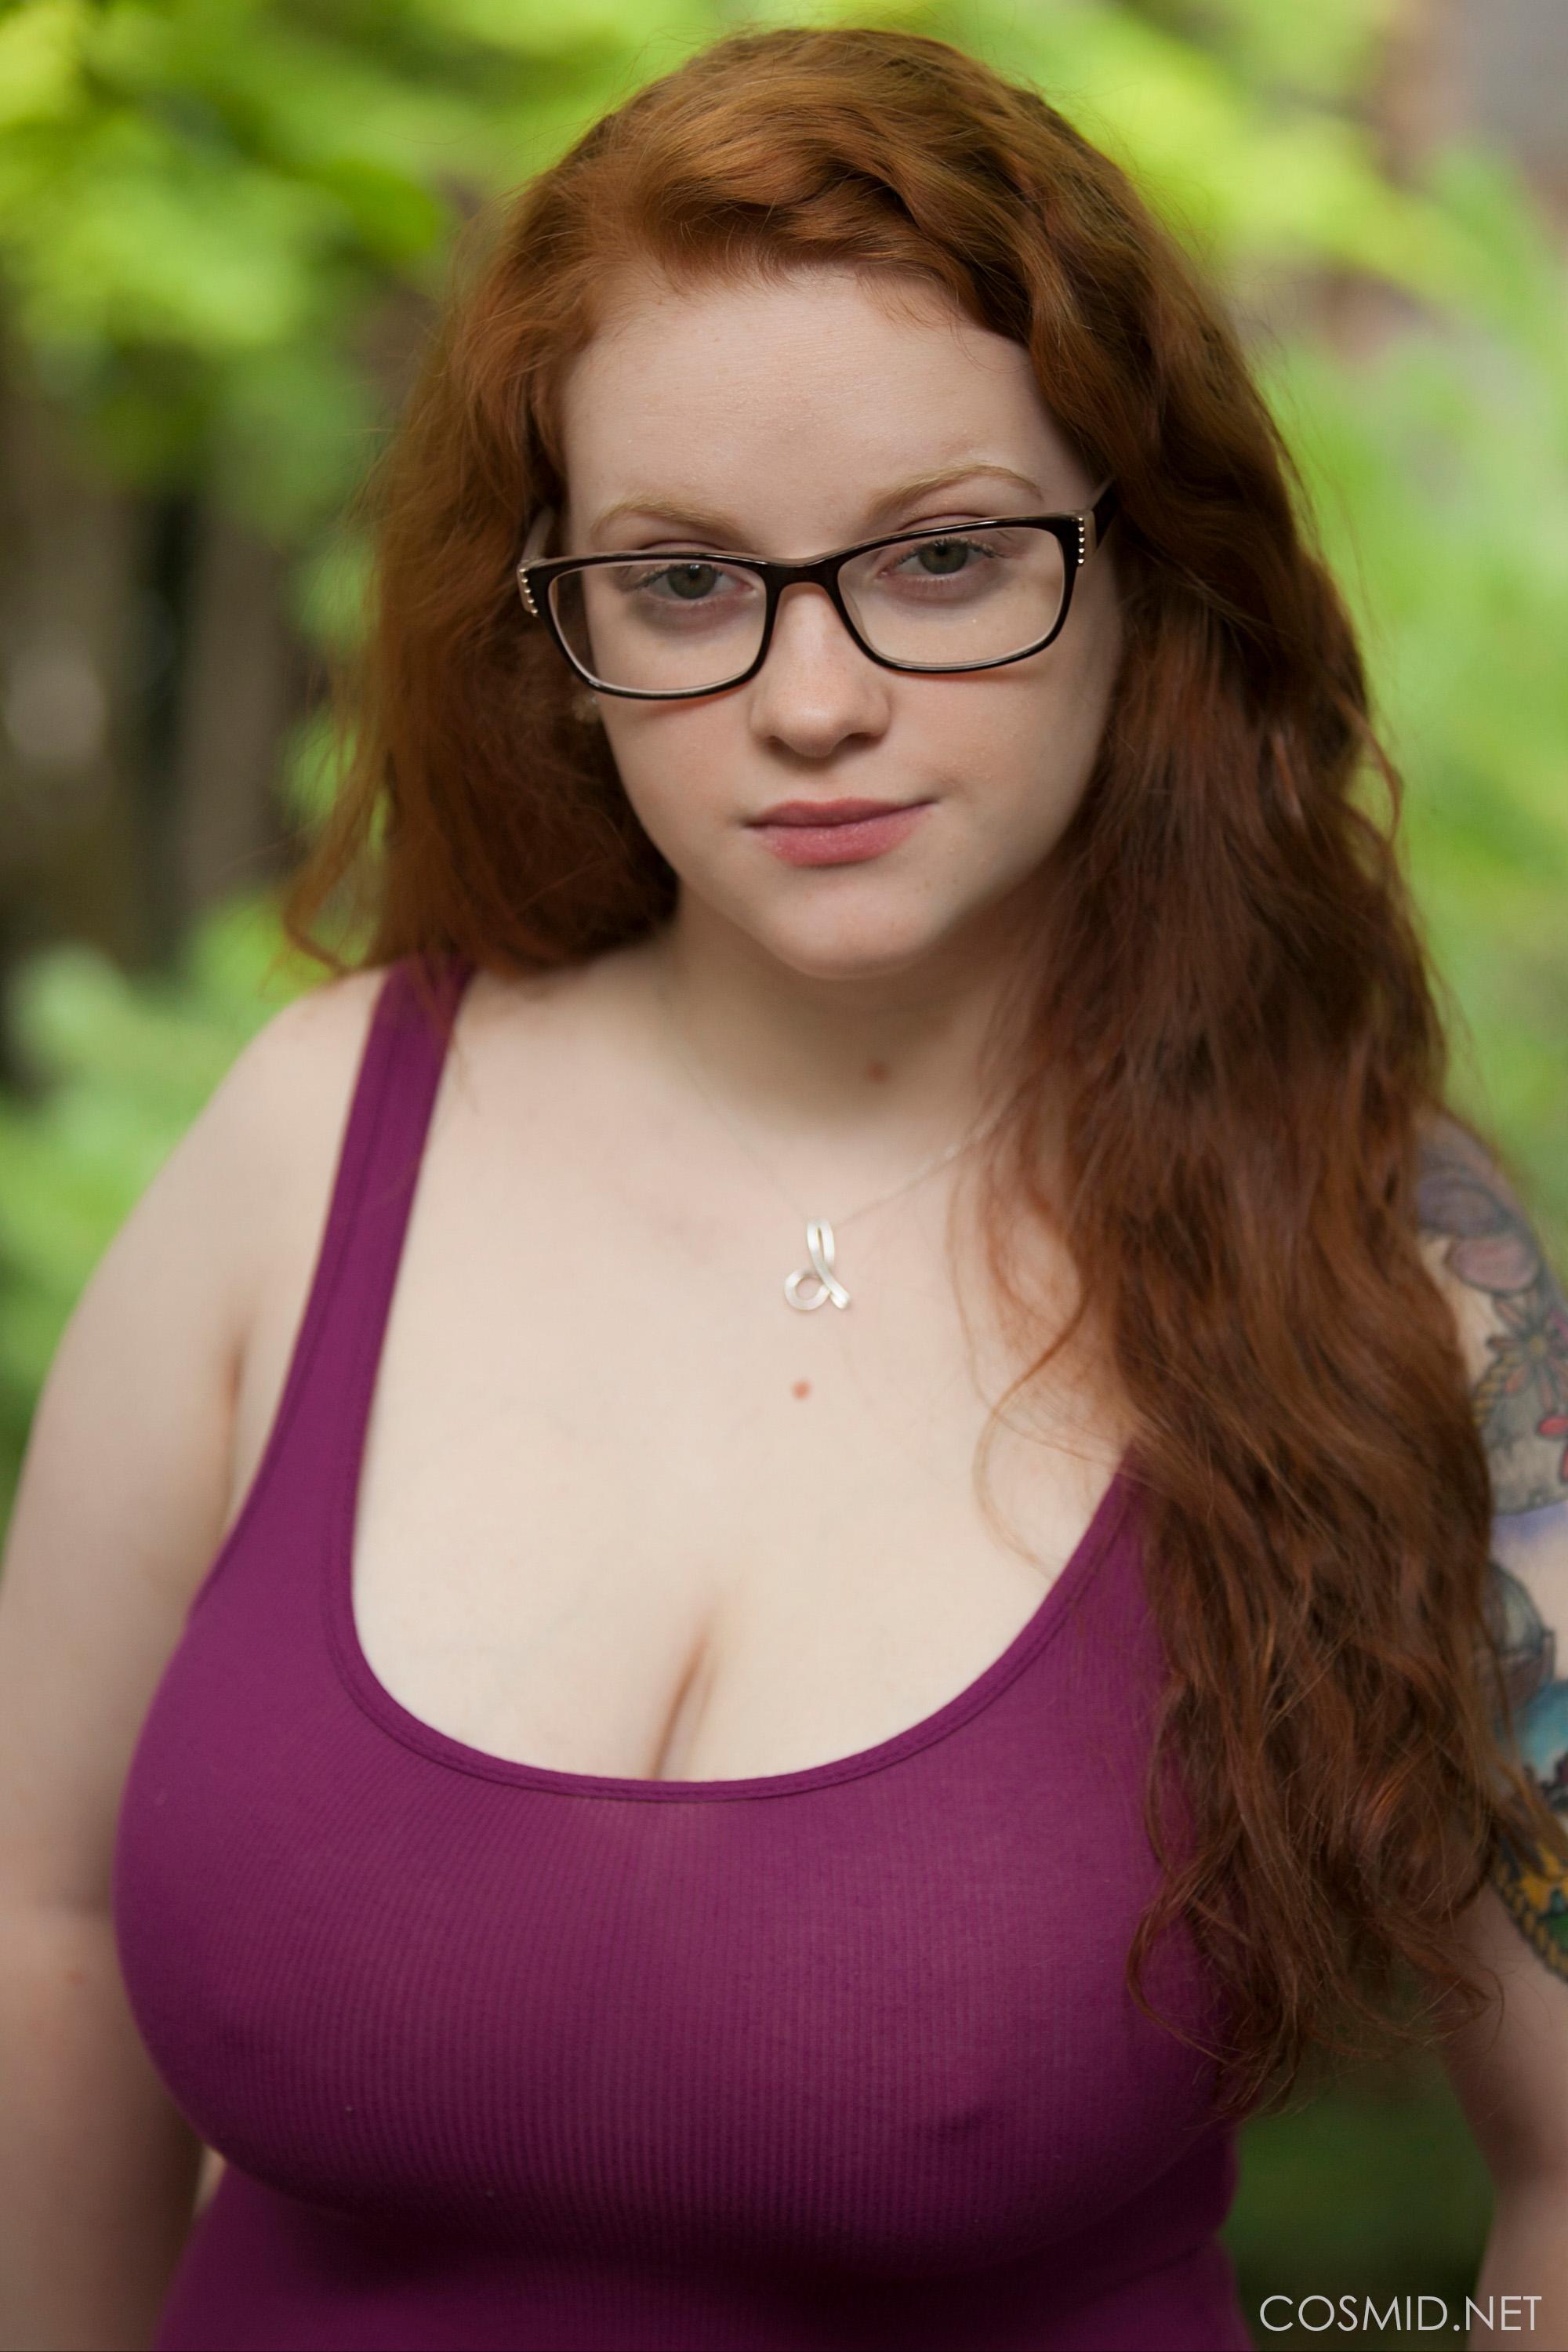 Short Haired Red Head Glasses